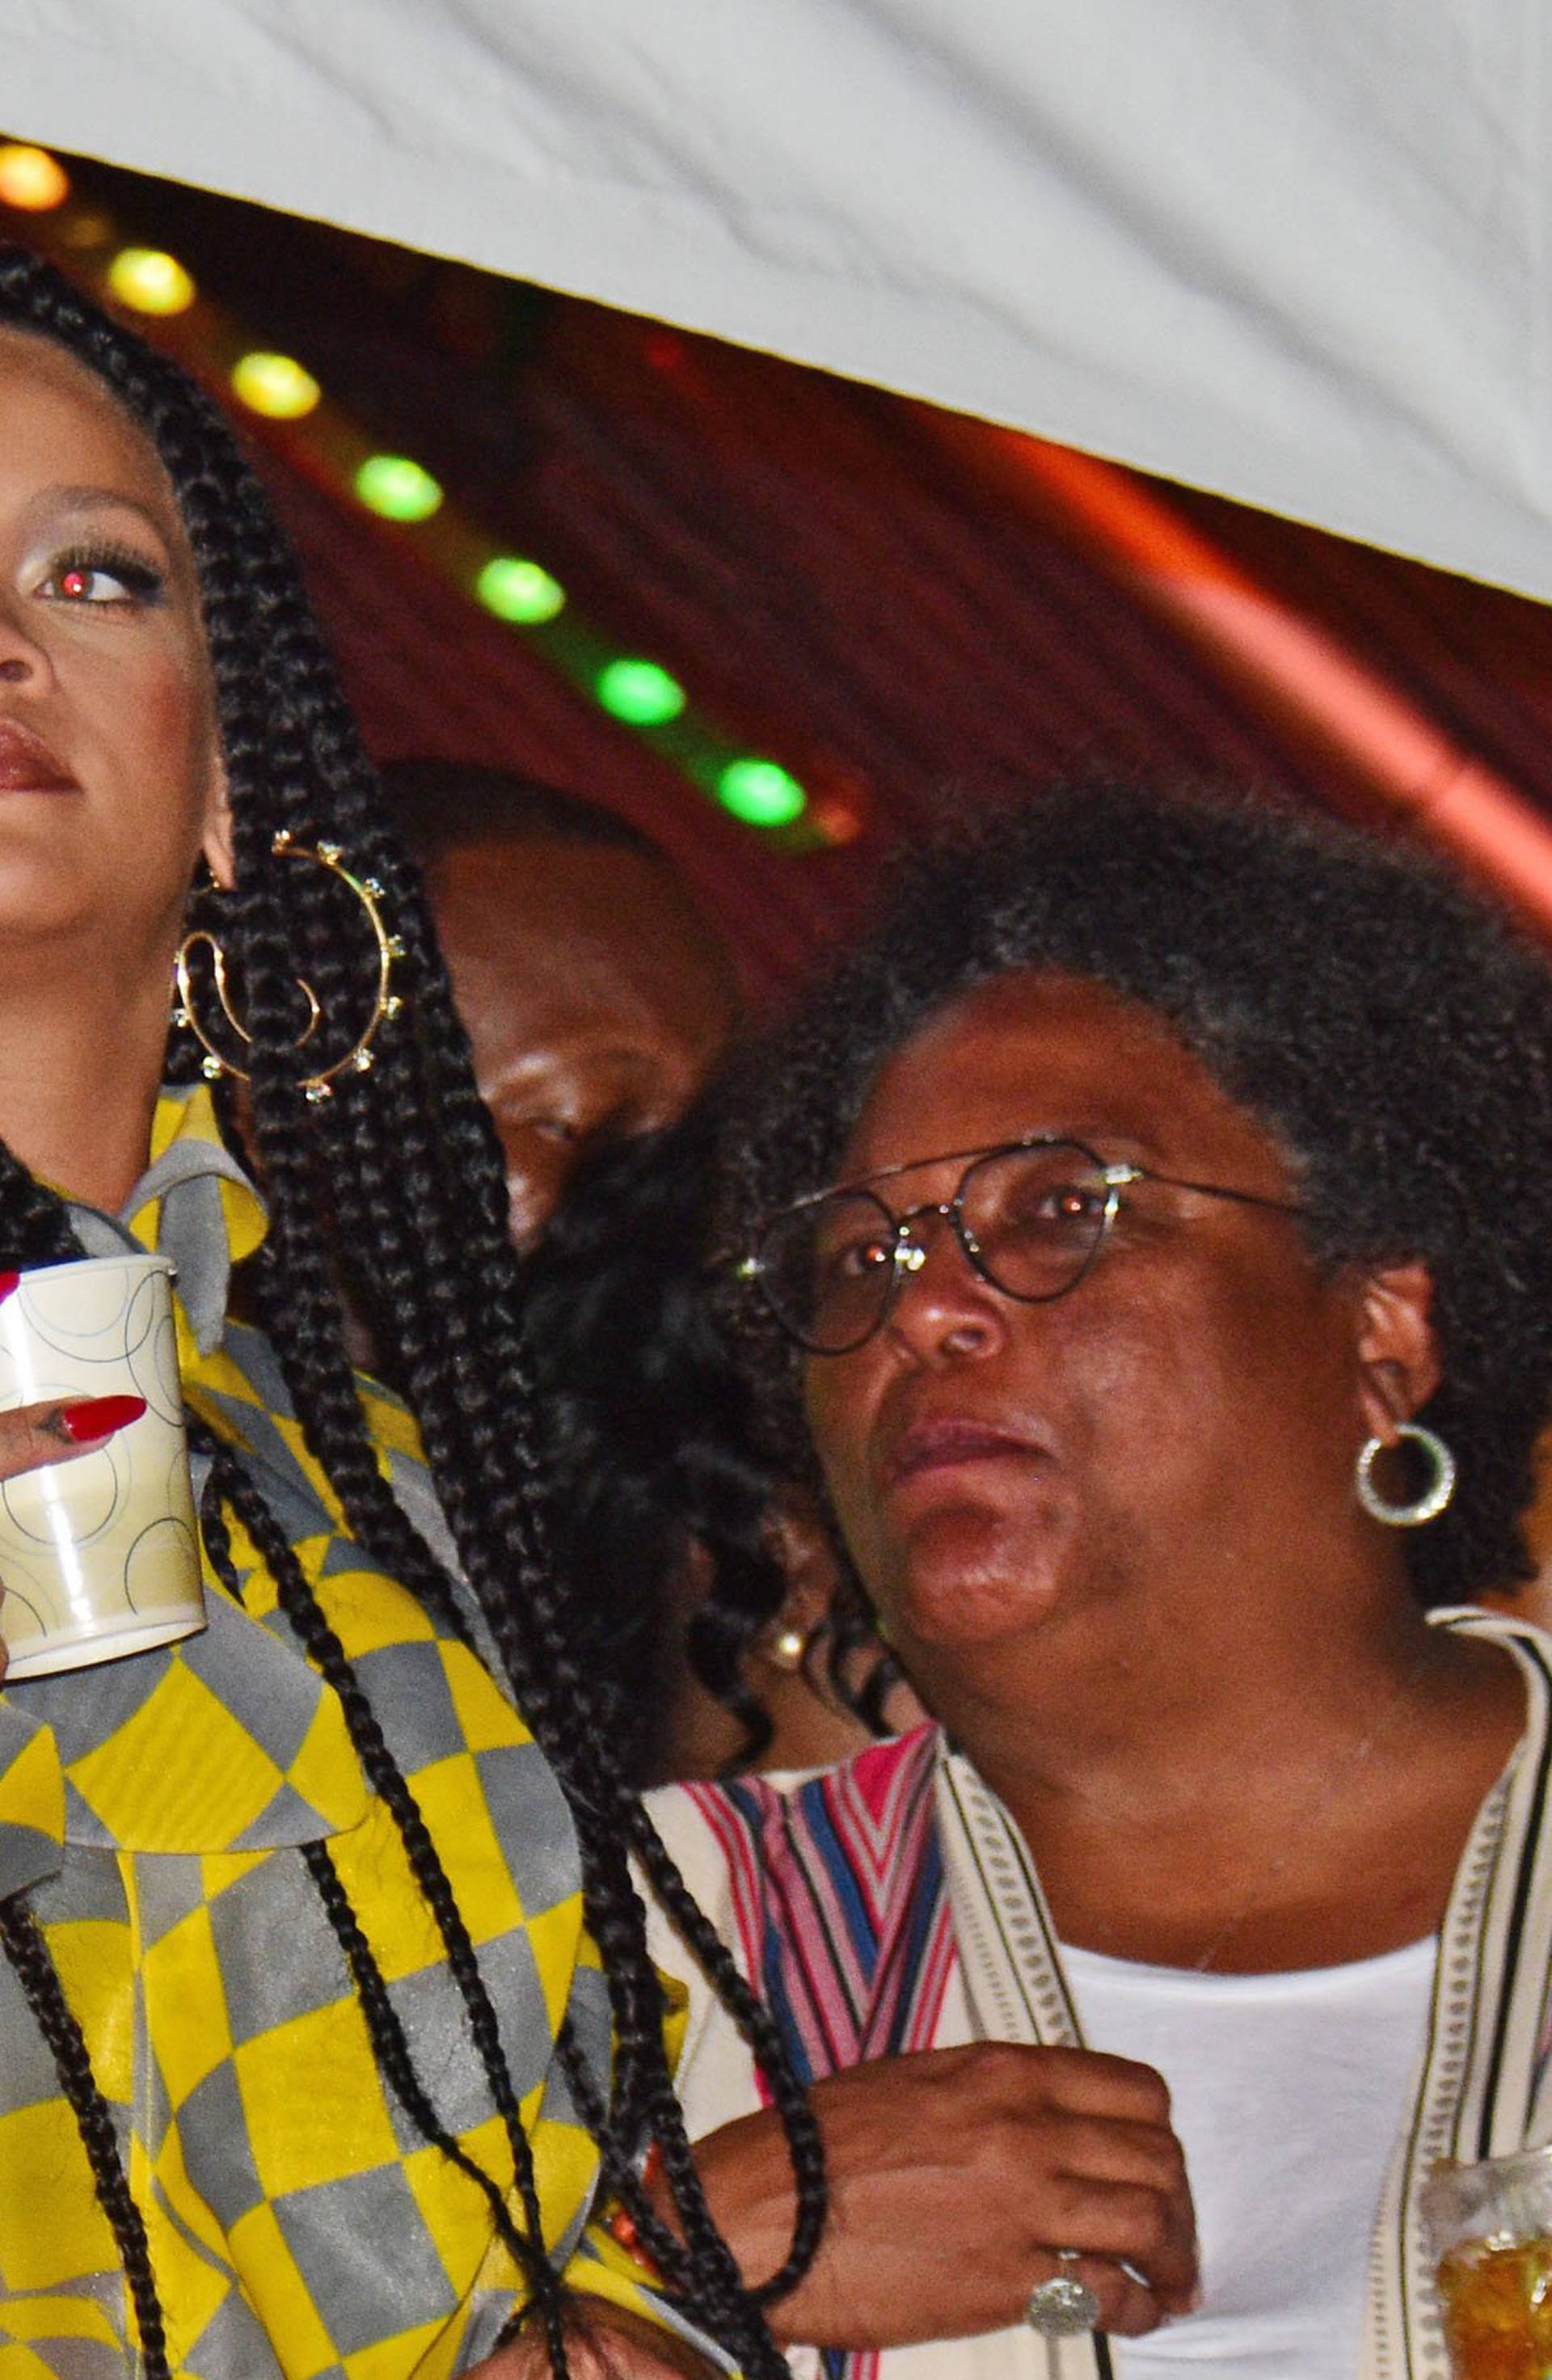 EXCLUSIVE: Rihanna pictured partying with Barbados Prime Minister Mia Mottley at Reggae star Buju Banton concert in Barbados